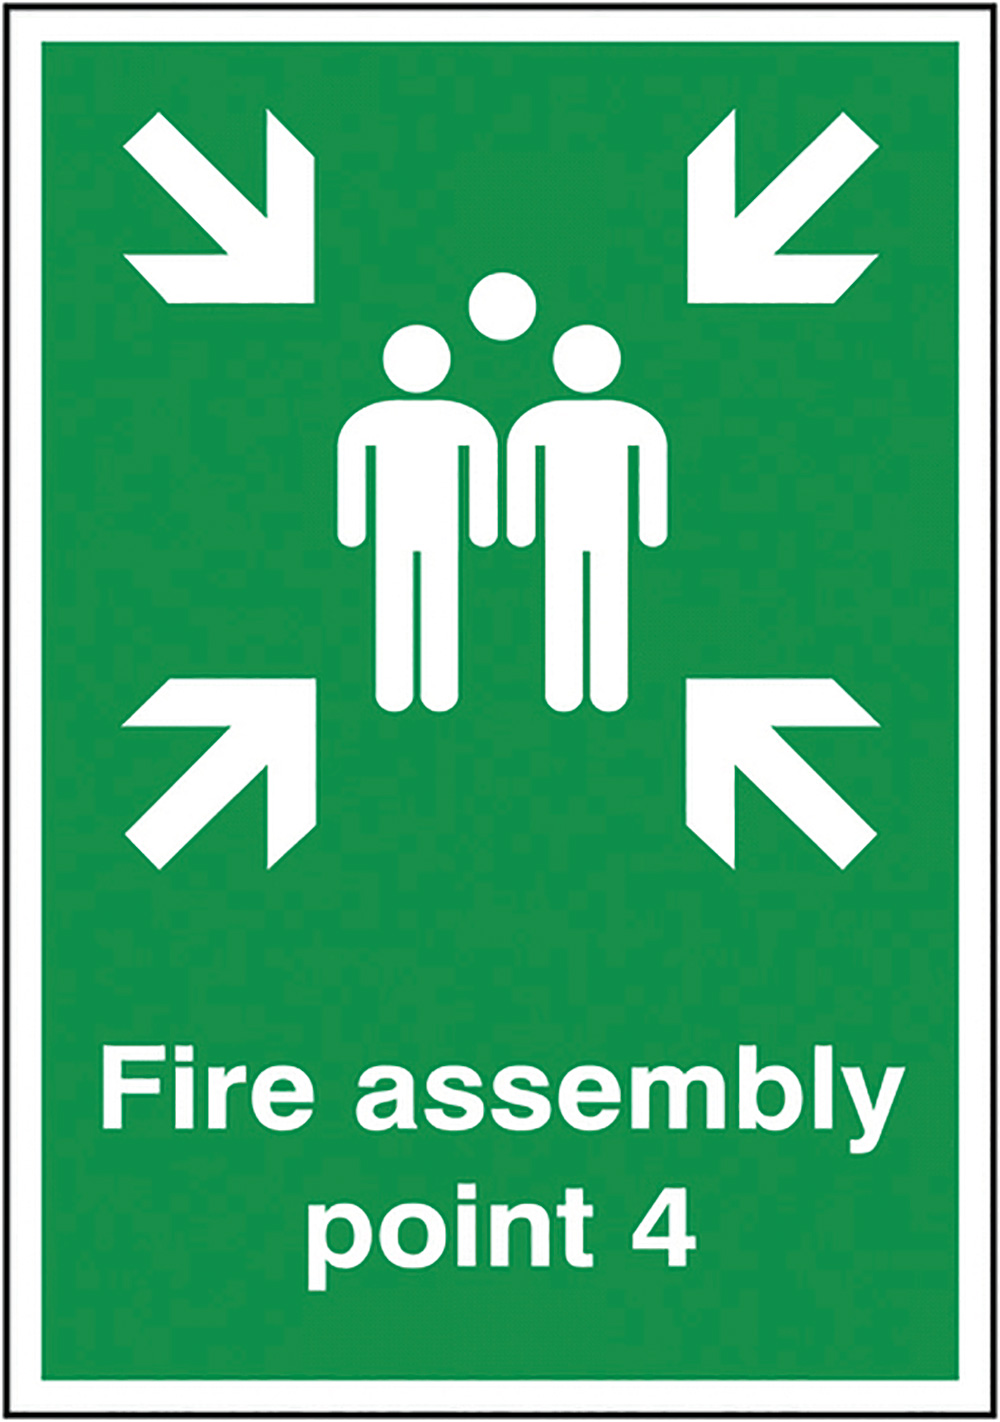 Fire Assembly Point 4  297x210mm Self Adhesive Vinyl Safety Sign  